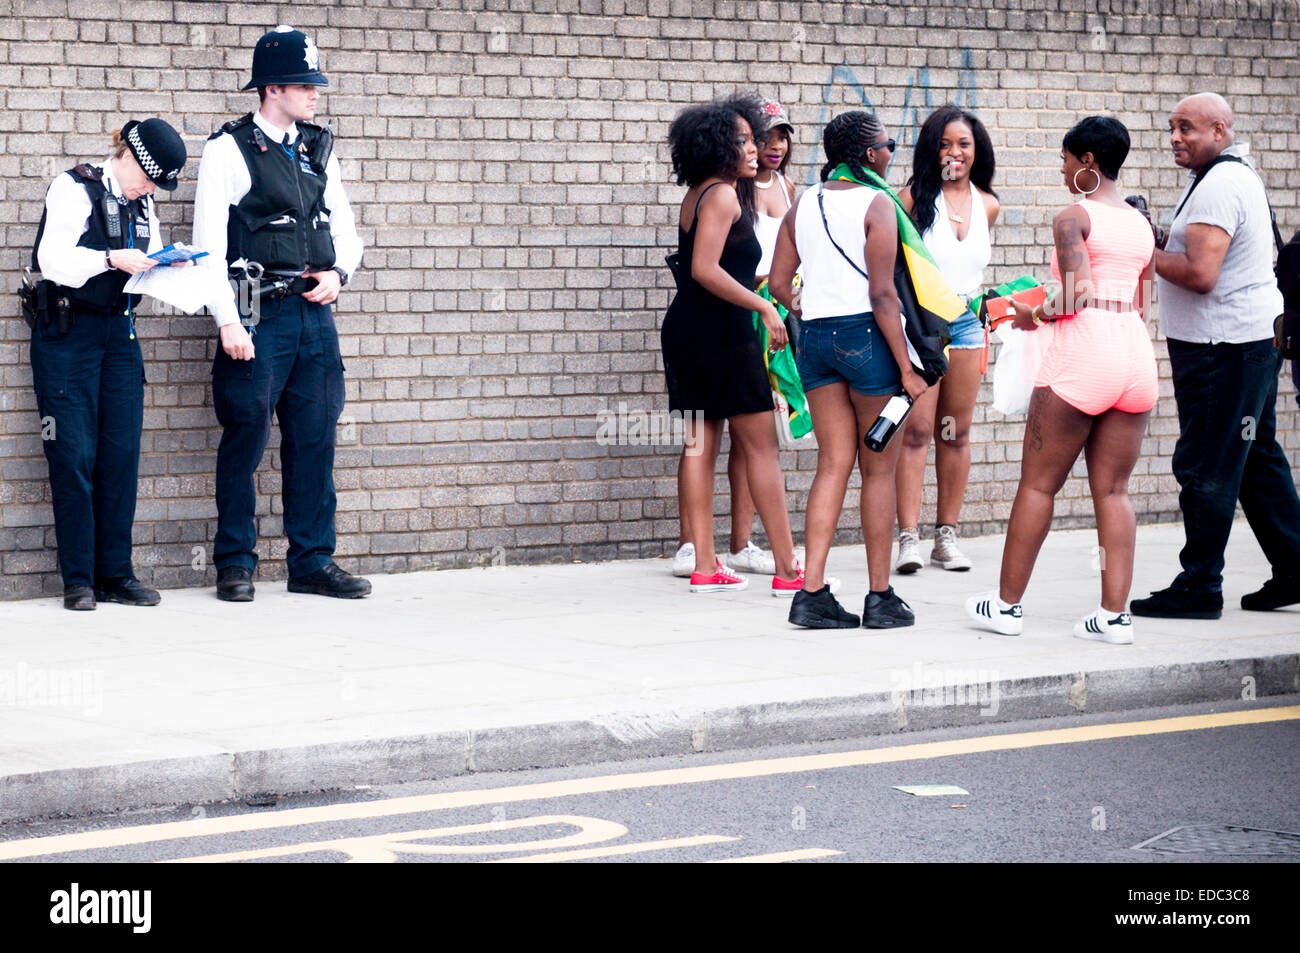 LONDON, UK - 24th AUGUST 2014: Notting Hill Carnival, Group of people gather together next to two police officers standing Stock Photo